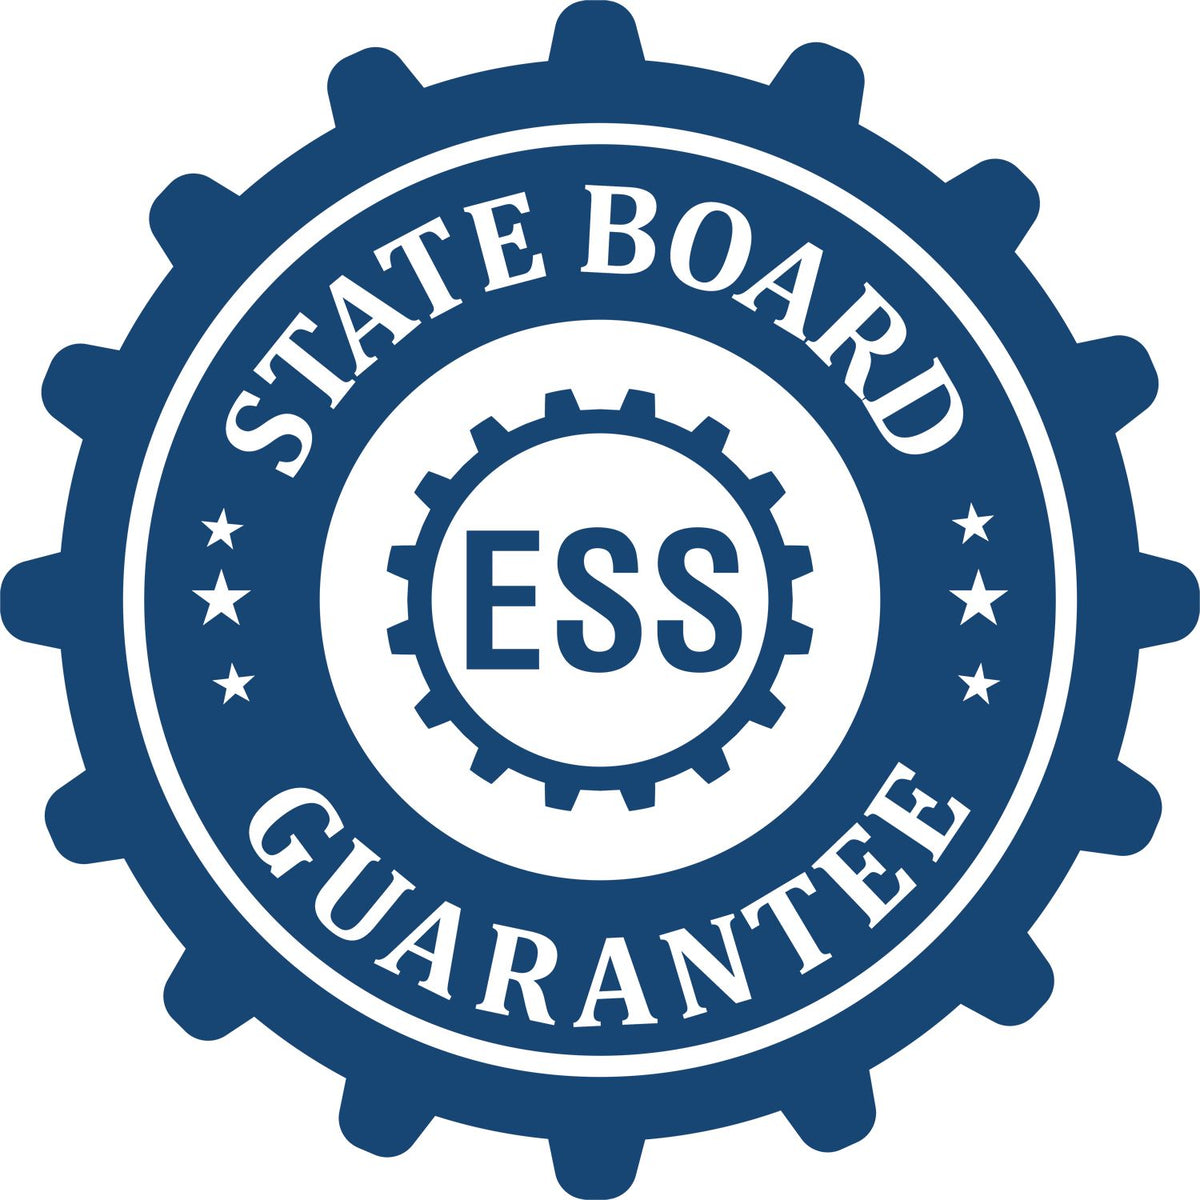 An emblem in a gear shape illustrating a state board guarantee for the Soft Louisiana Professional Engineer Seal product.